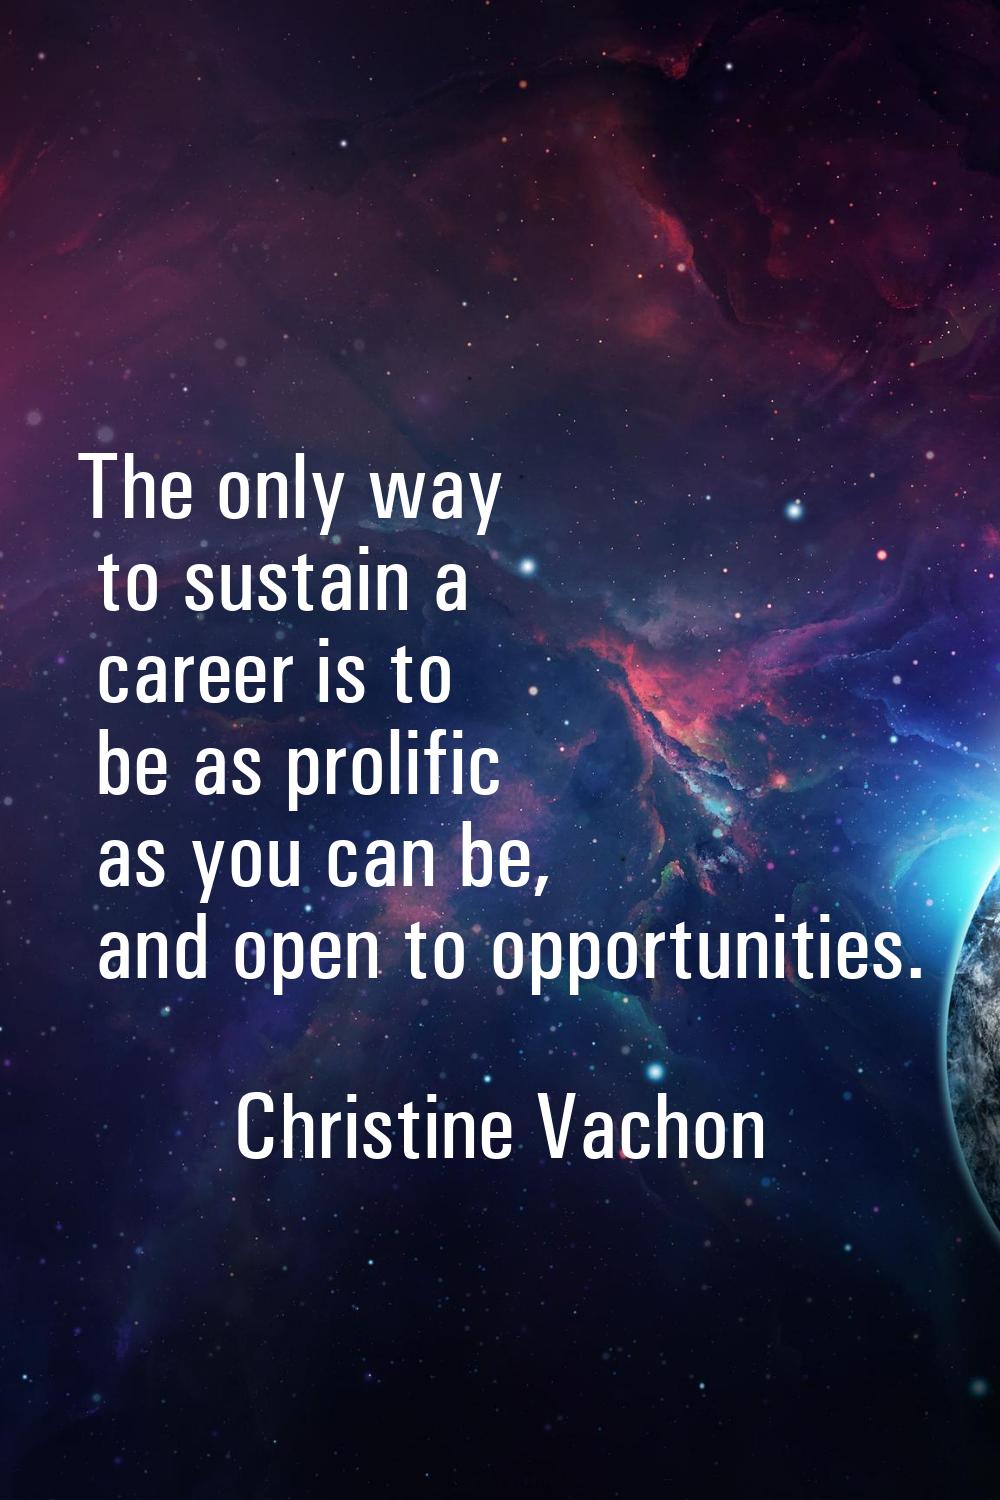 The only way to sustain a career is to be as prolific as you can be, and open to opportunities.